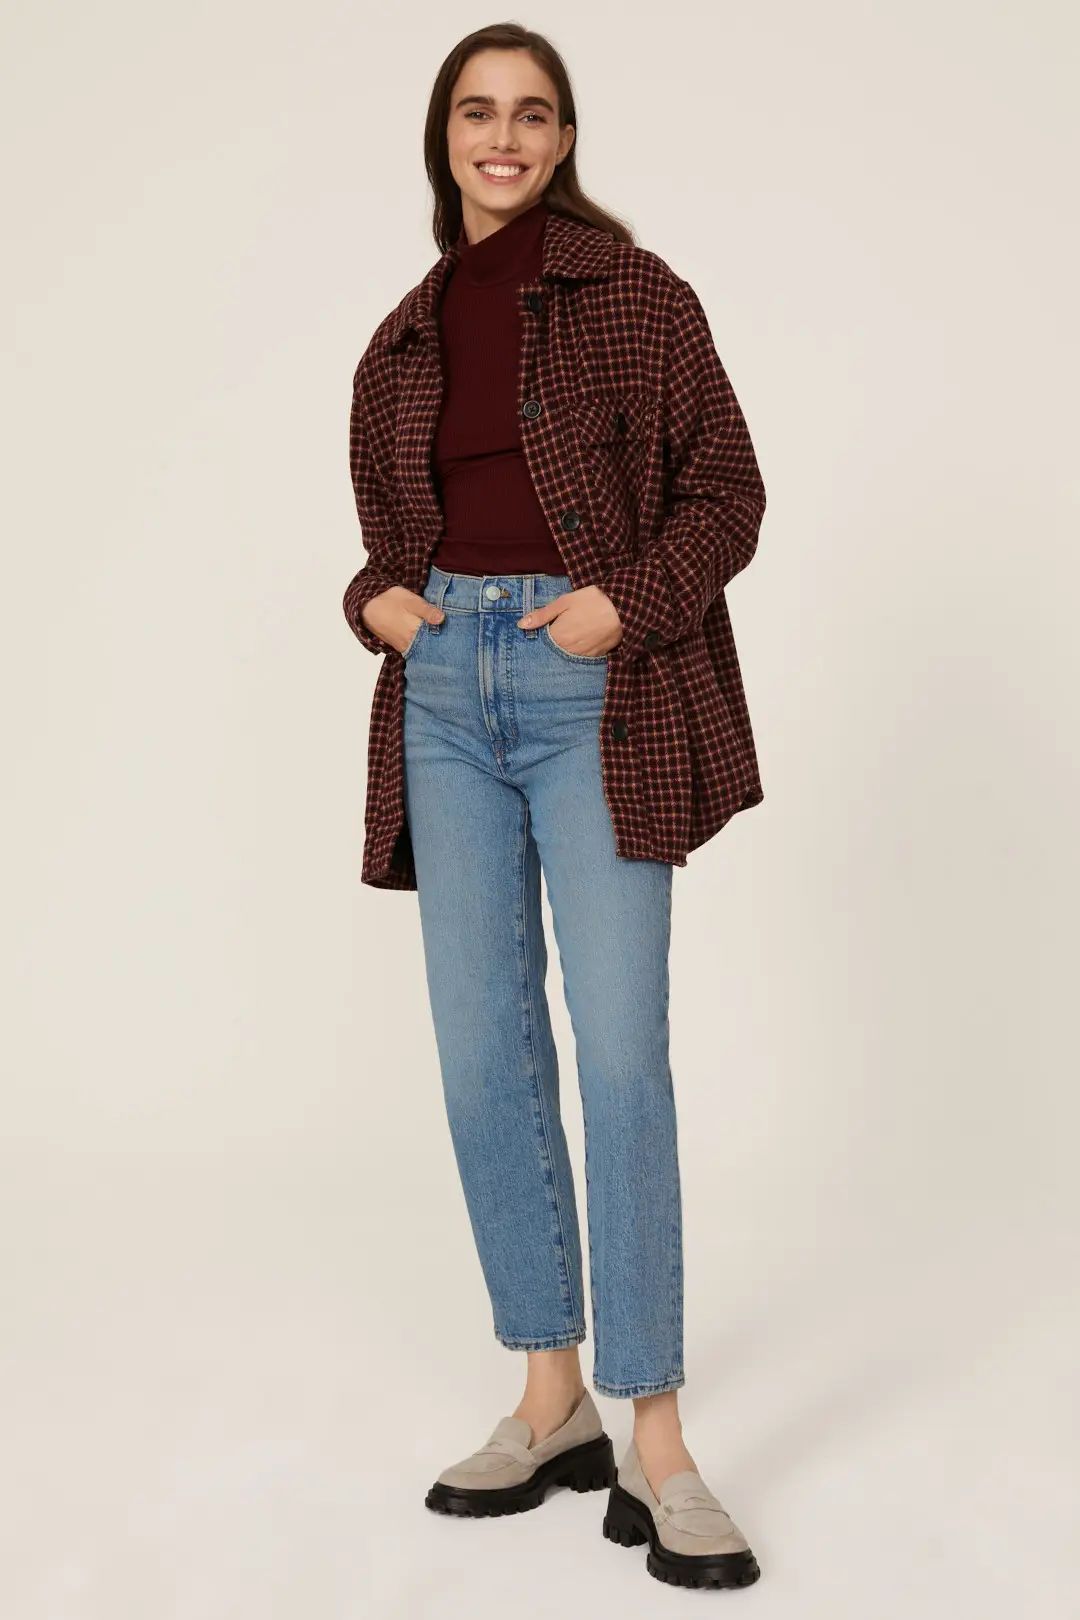 Madewell | Rent the Runway